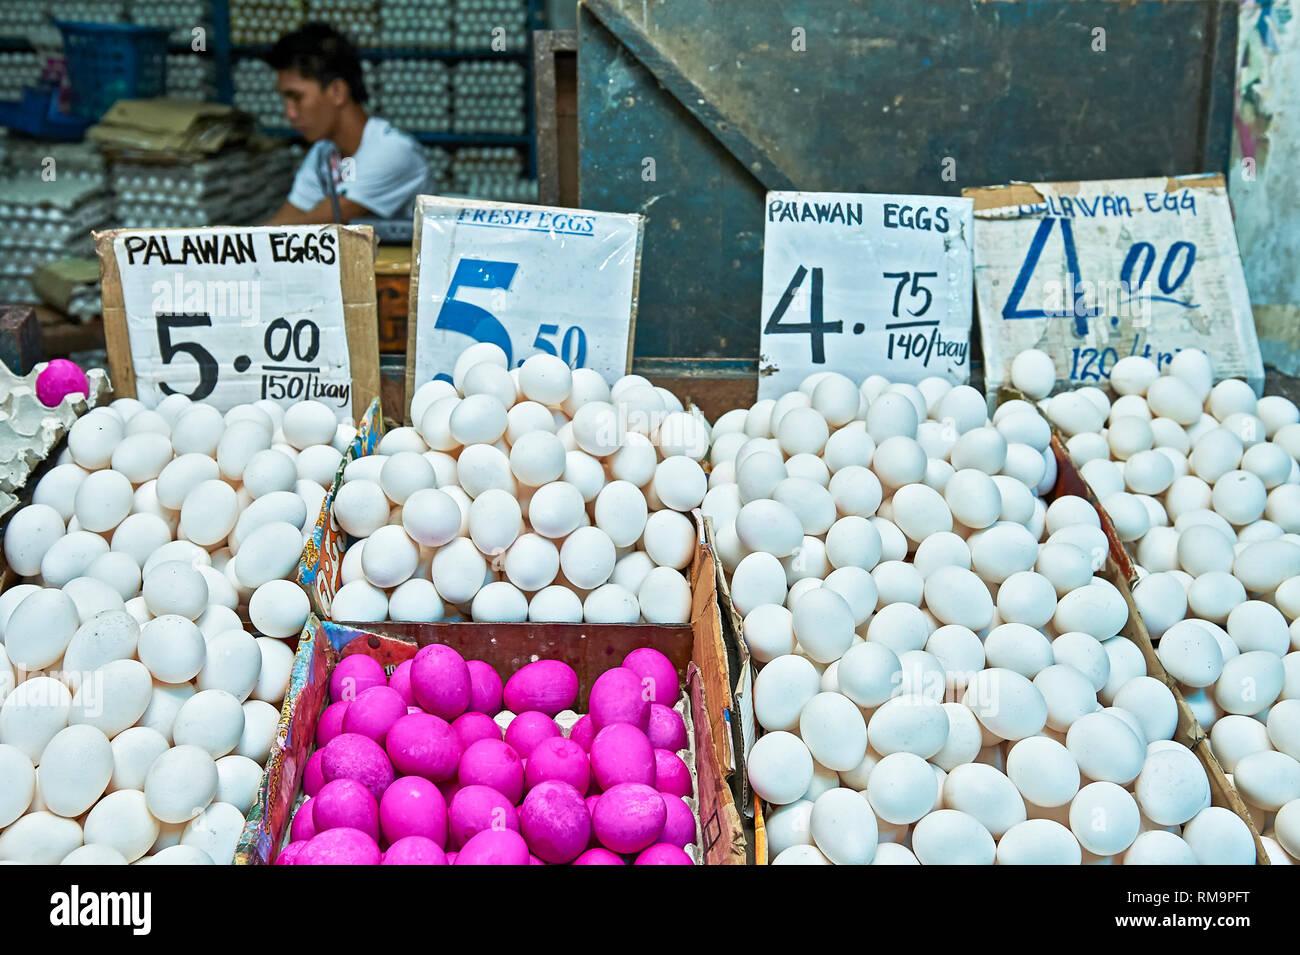 Young vendor selling white and red eggs at the Central Market in Puerto Princesa City, Palawan Province, Philippines Stock Photo